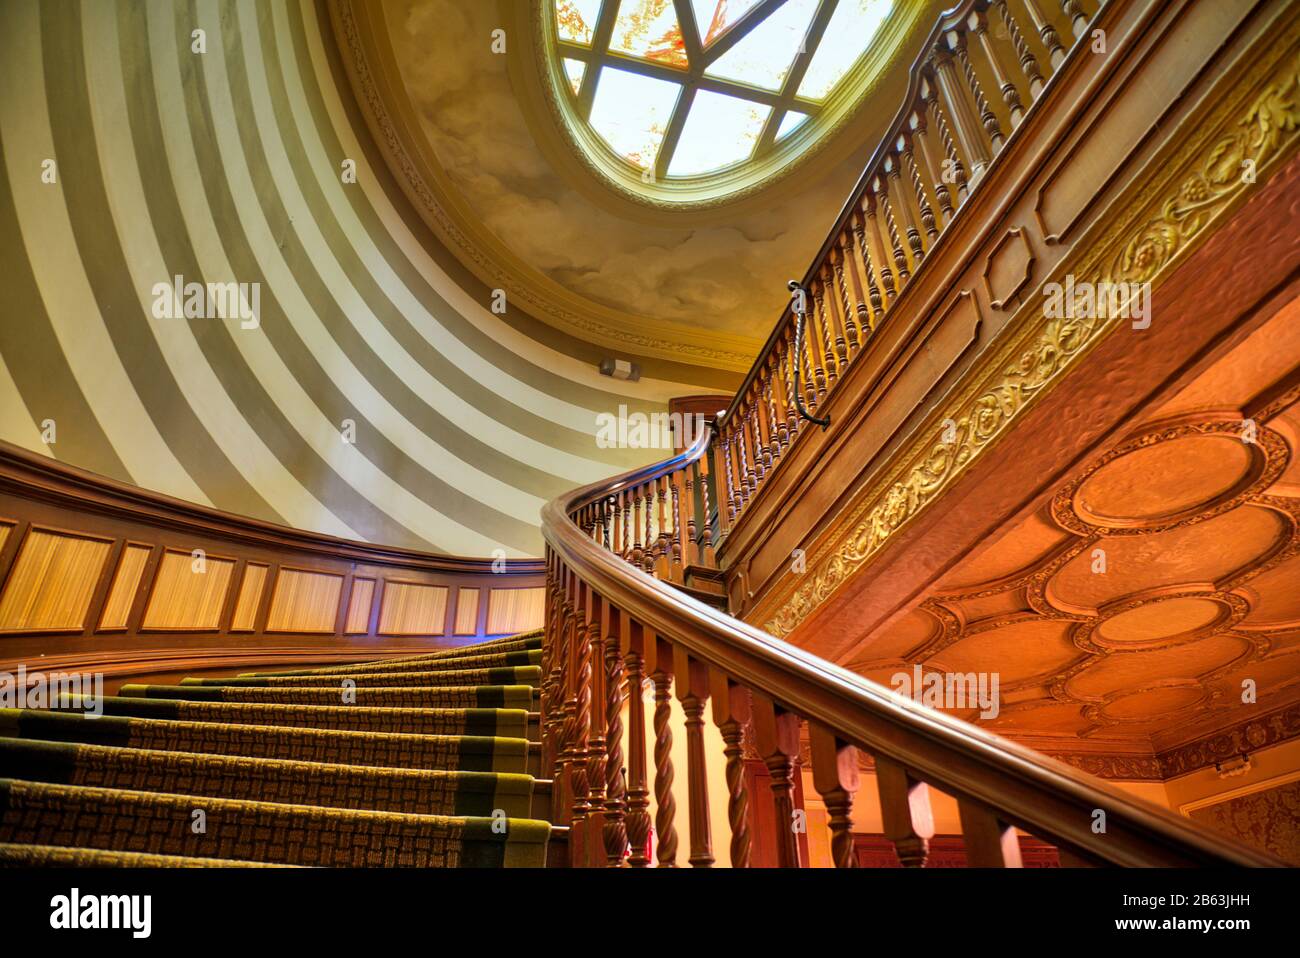 Interior of Gothic style building - staircase Stock Photo